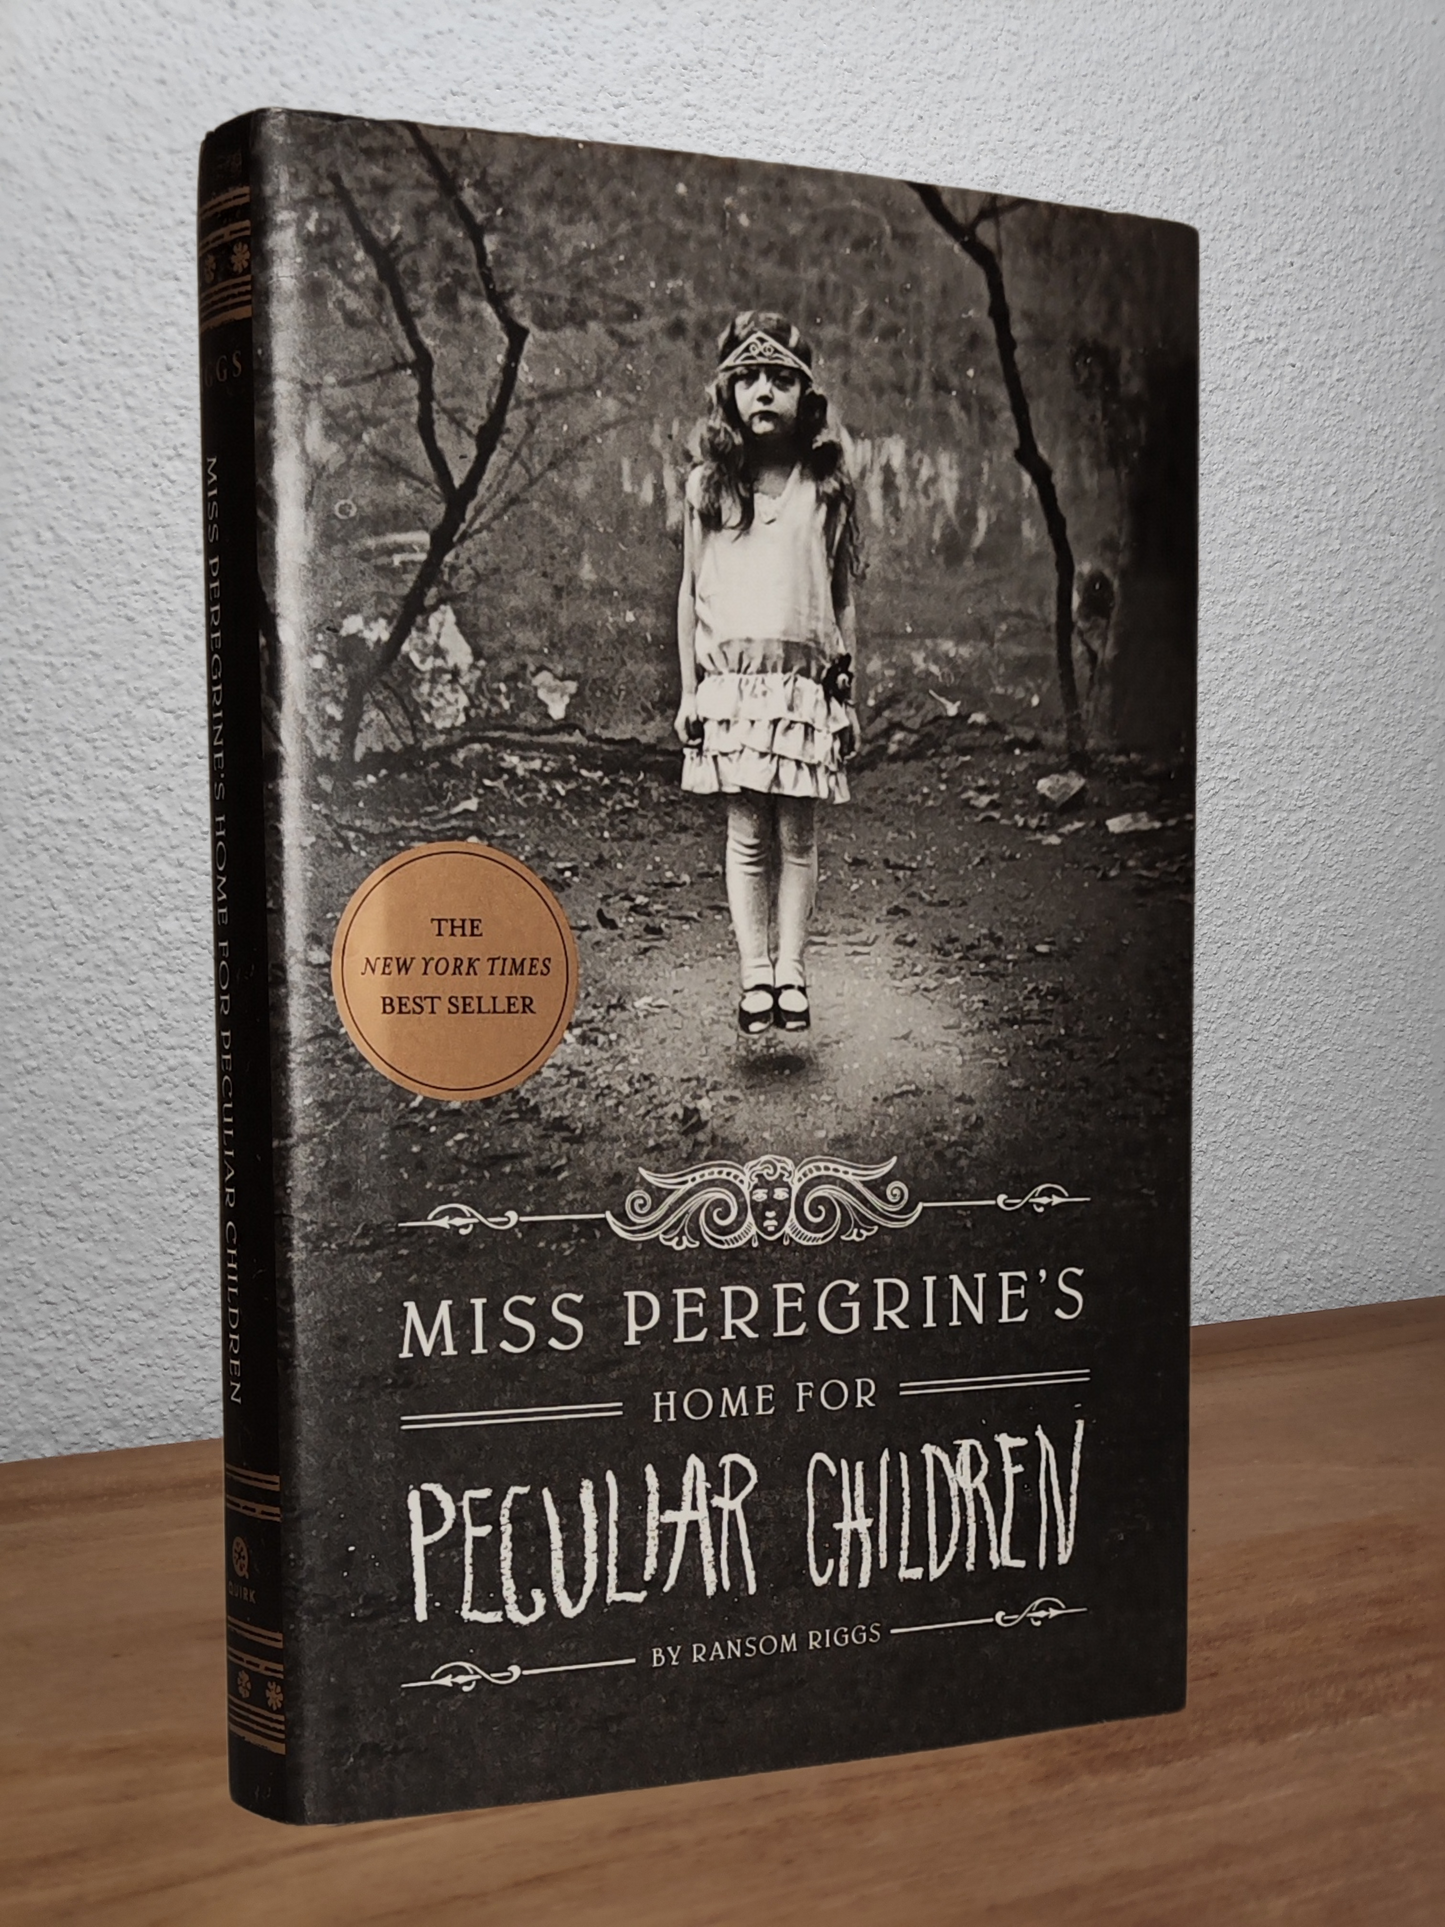 Ransom Riggs - Miss Peregrine's Home for Peculiar Children (Miss Peregrine's Peculiar Children #1)  - Second-hand english book to deliver in Zurich & Switzerland